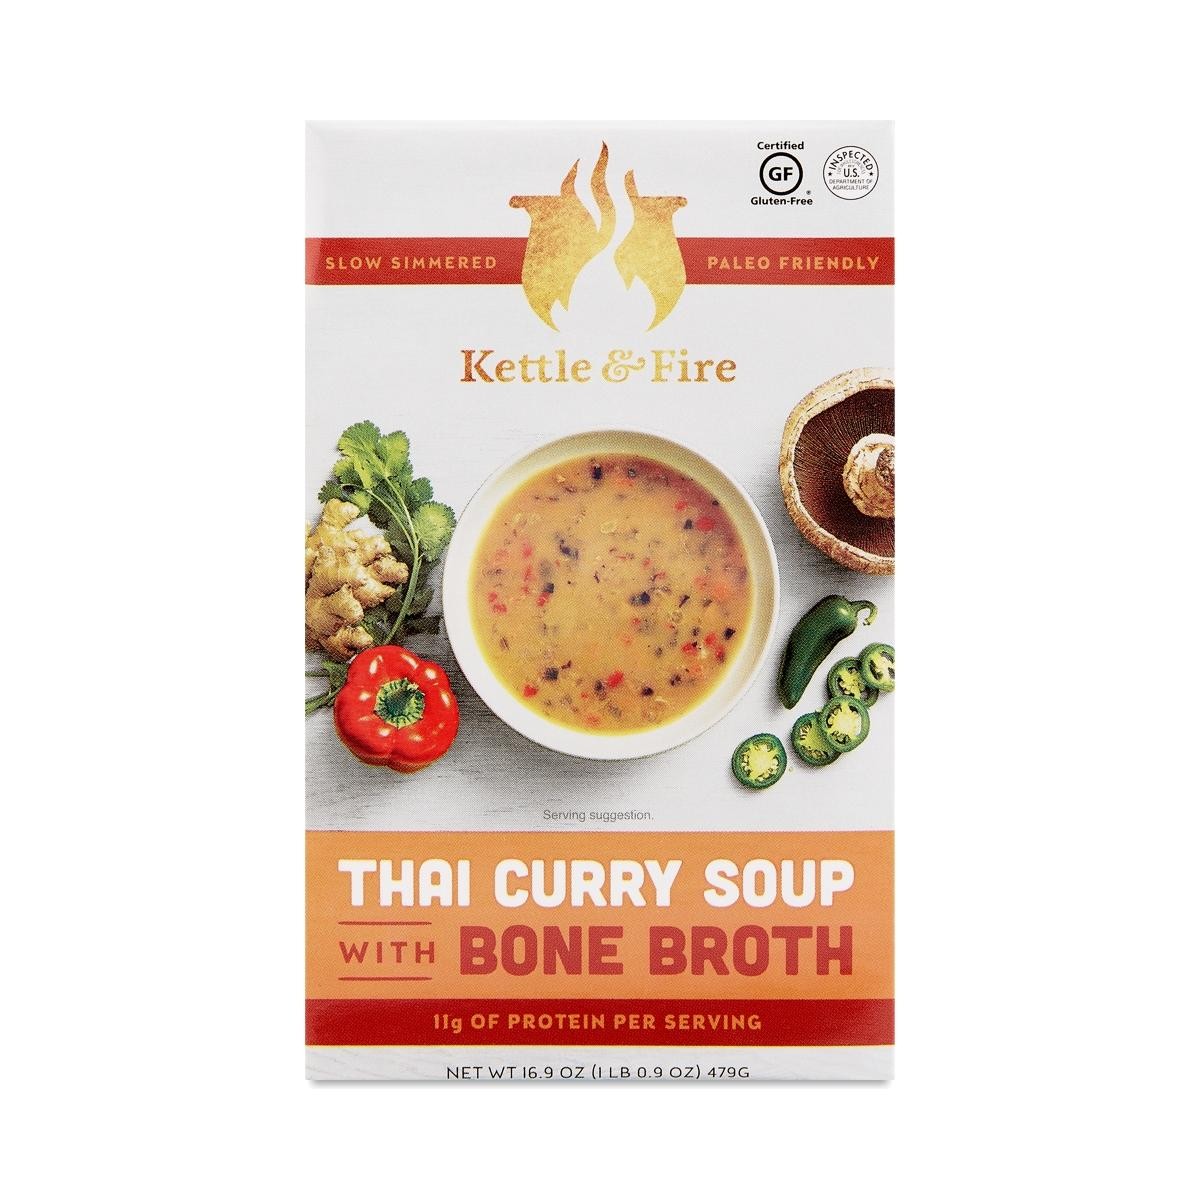 Thai Curry Soup with Bone Broth